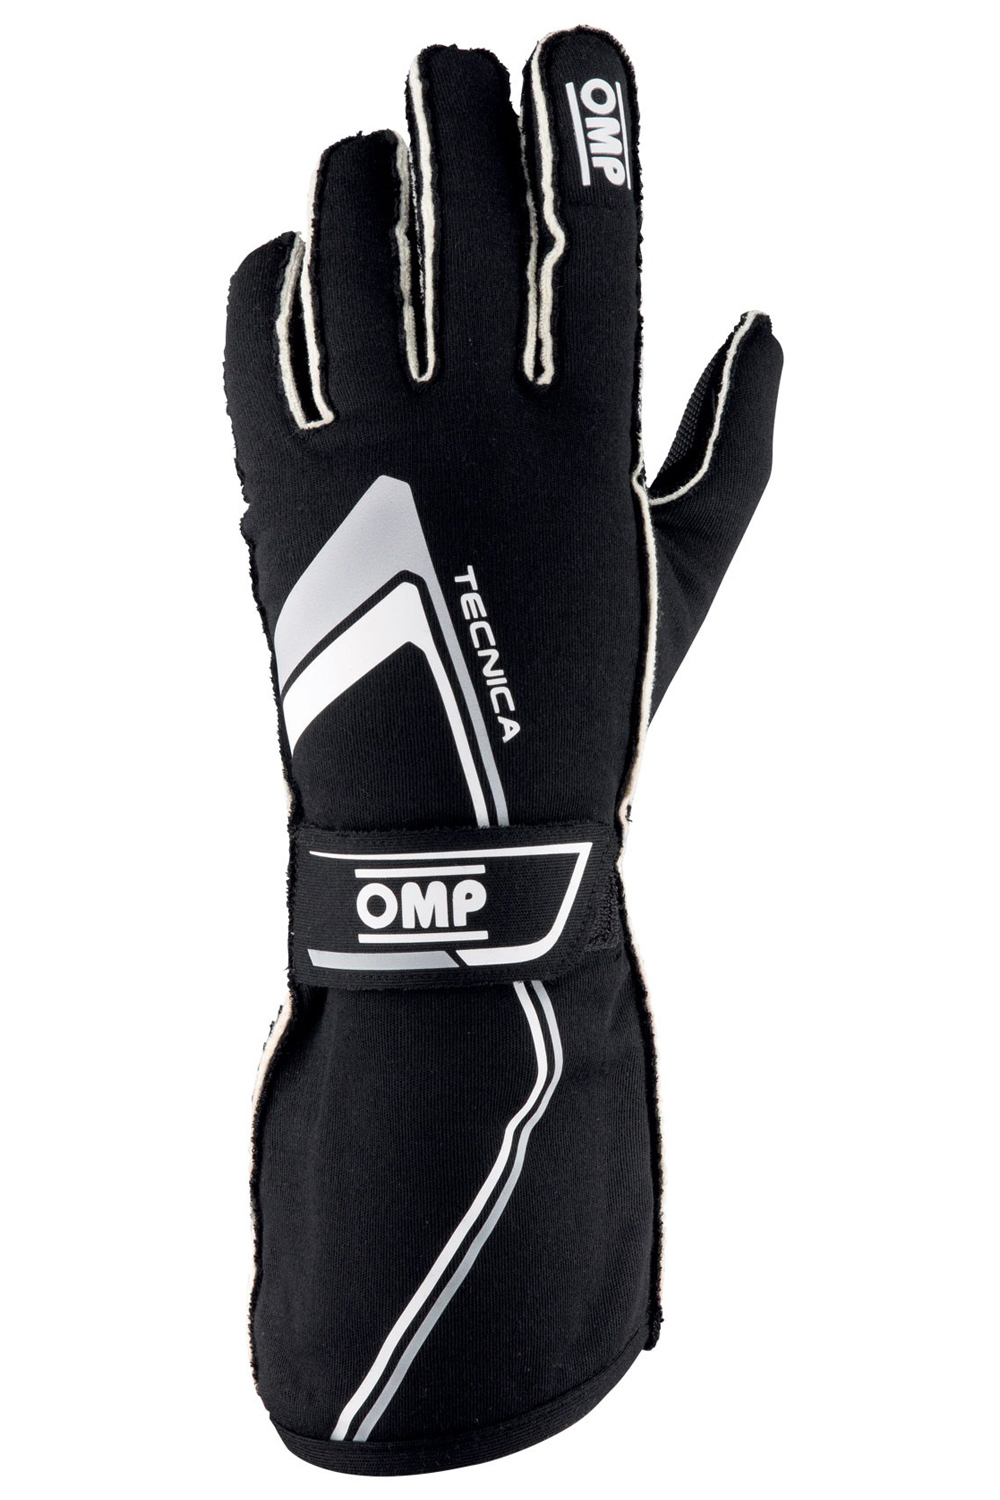 OMP Racing IB772NWXL - TECNICA Gloves Black And White Size X Large